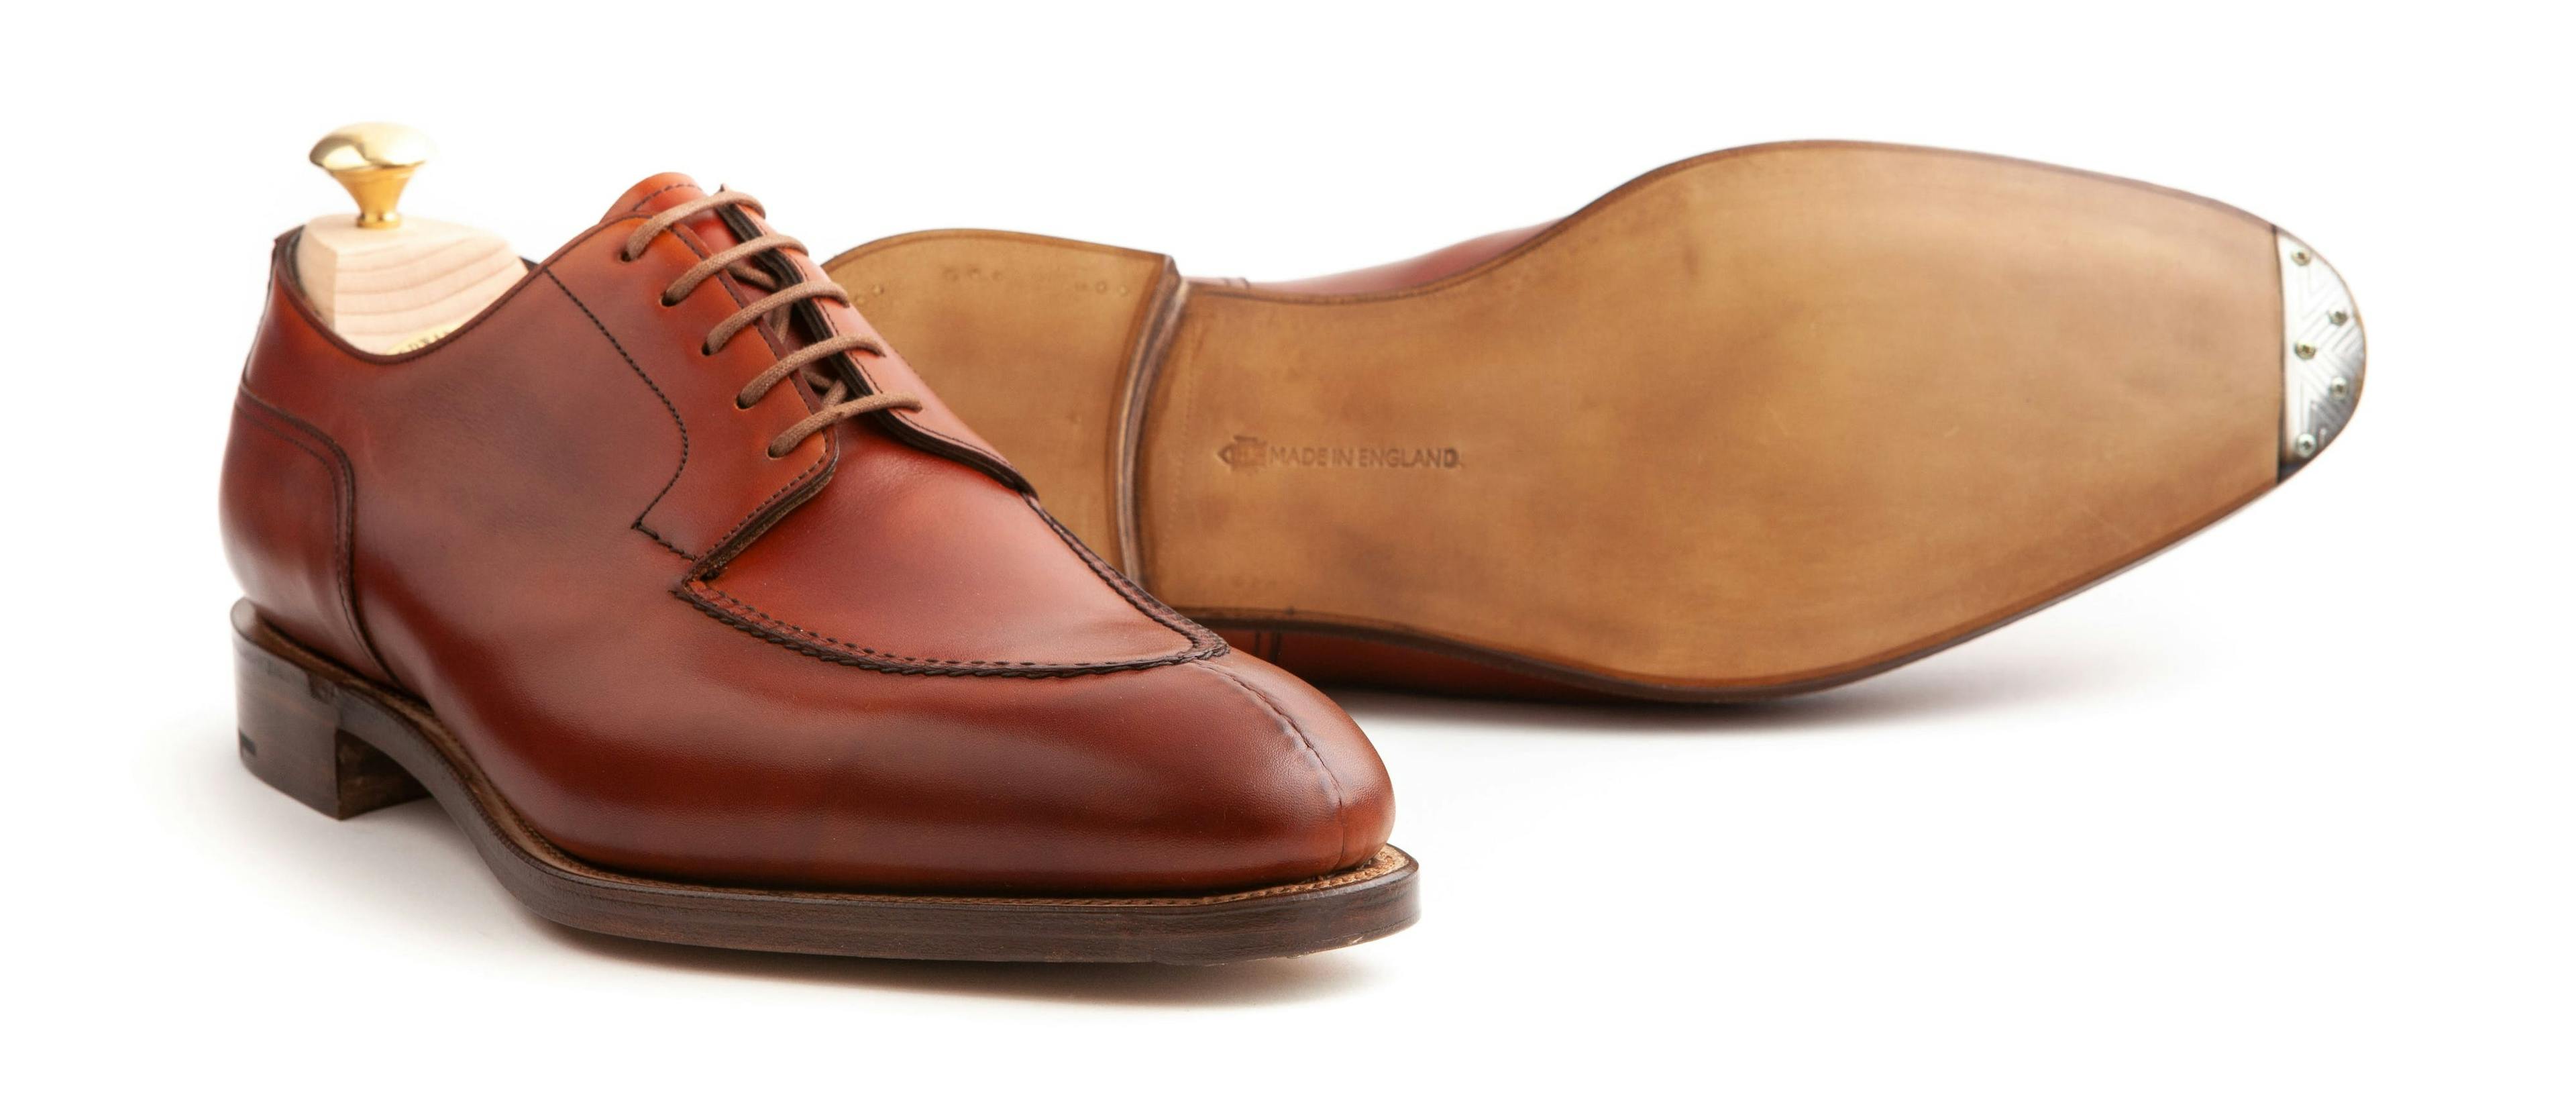 An Edward Green Dover in Redwood calf with a view of its single leather soles with metal toe plates.